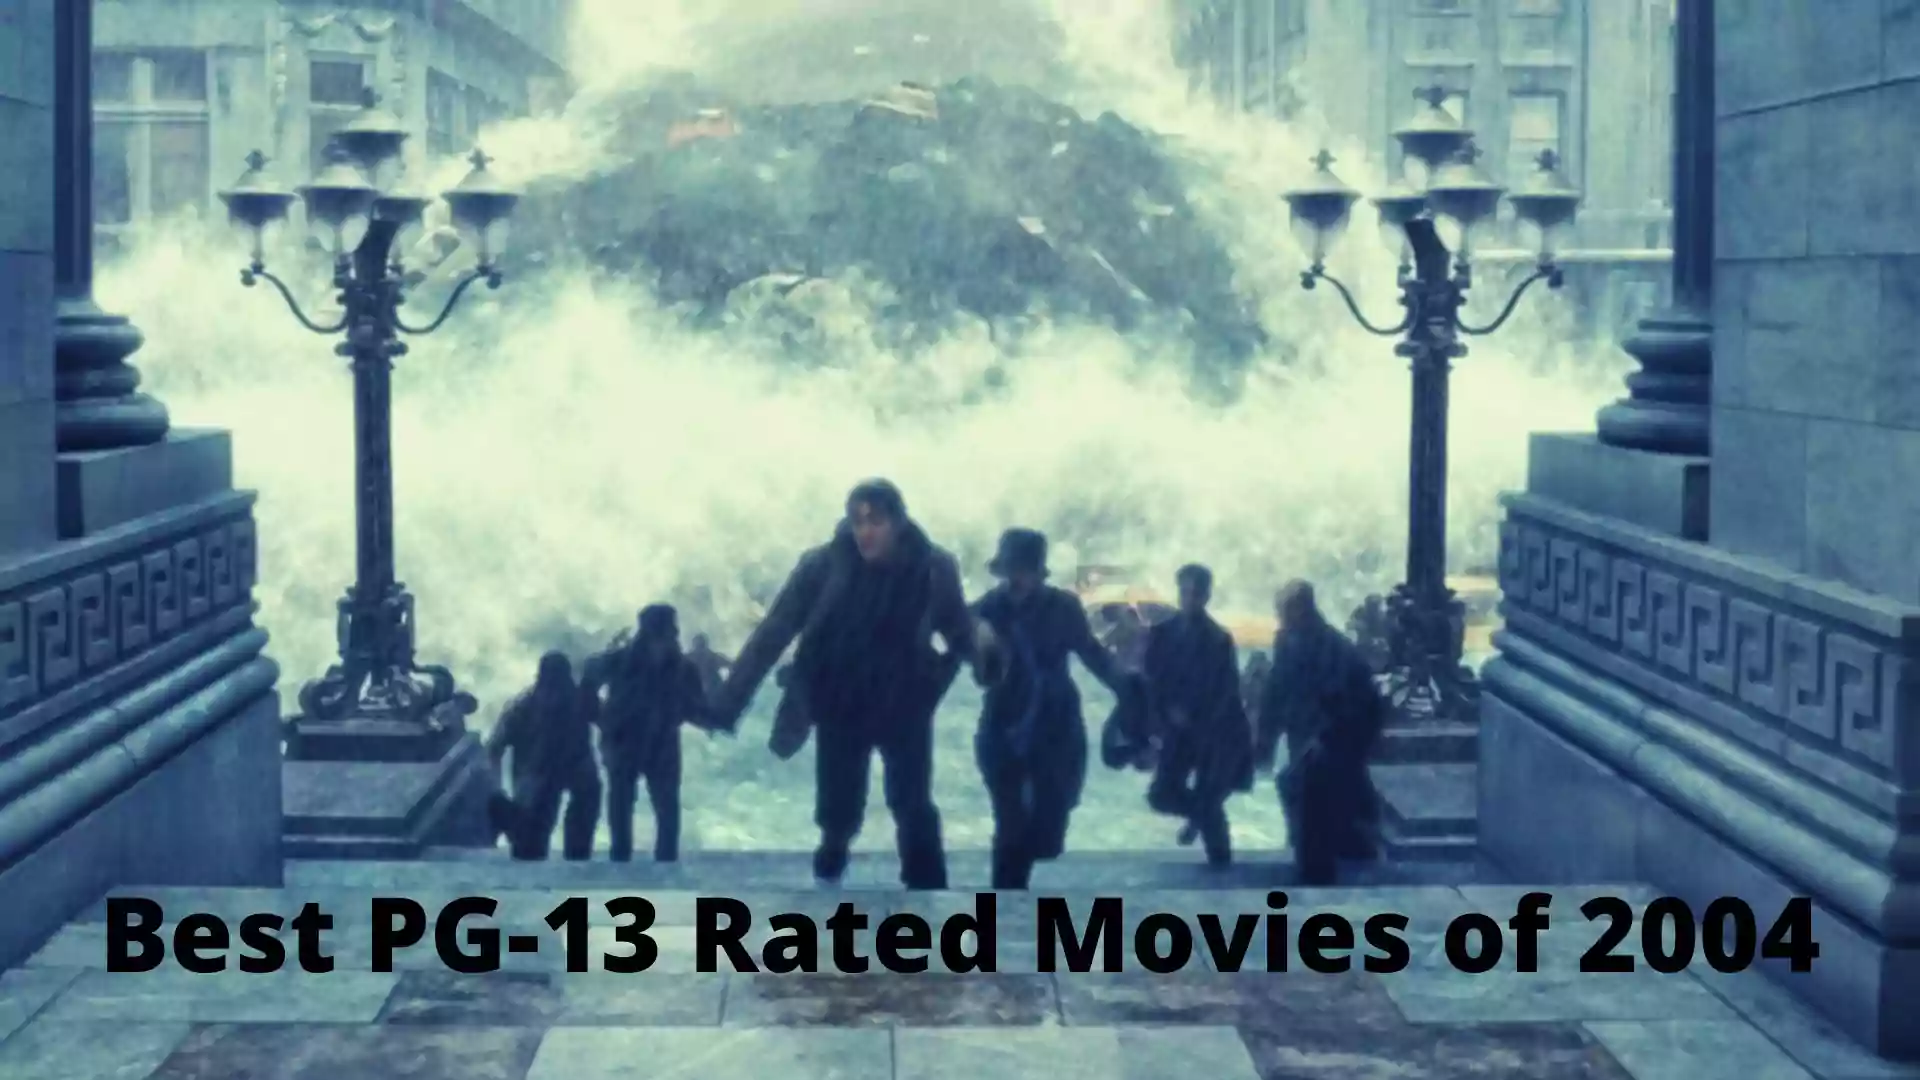 Best PG-13 Rated Movies of 2004